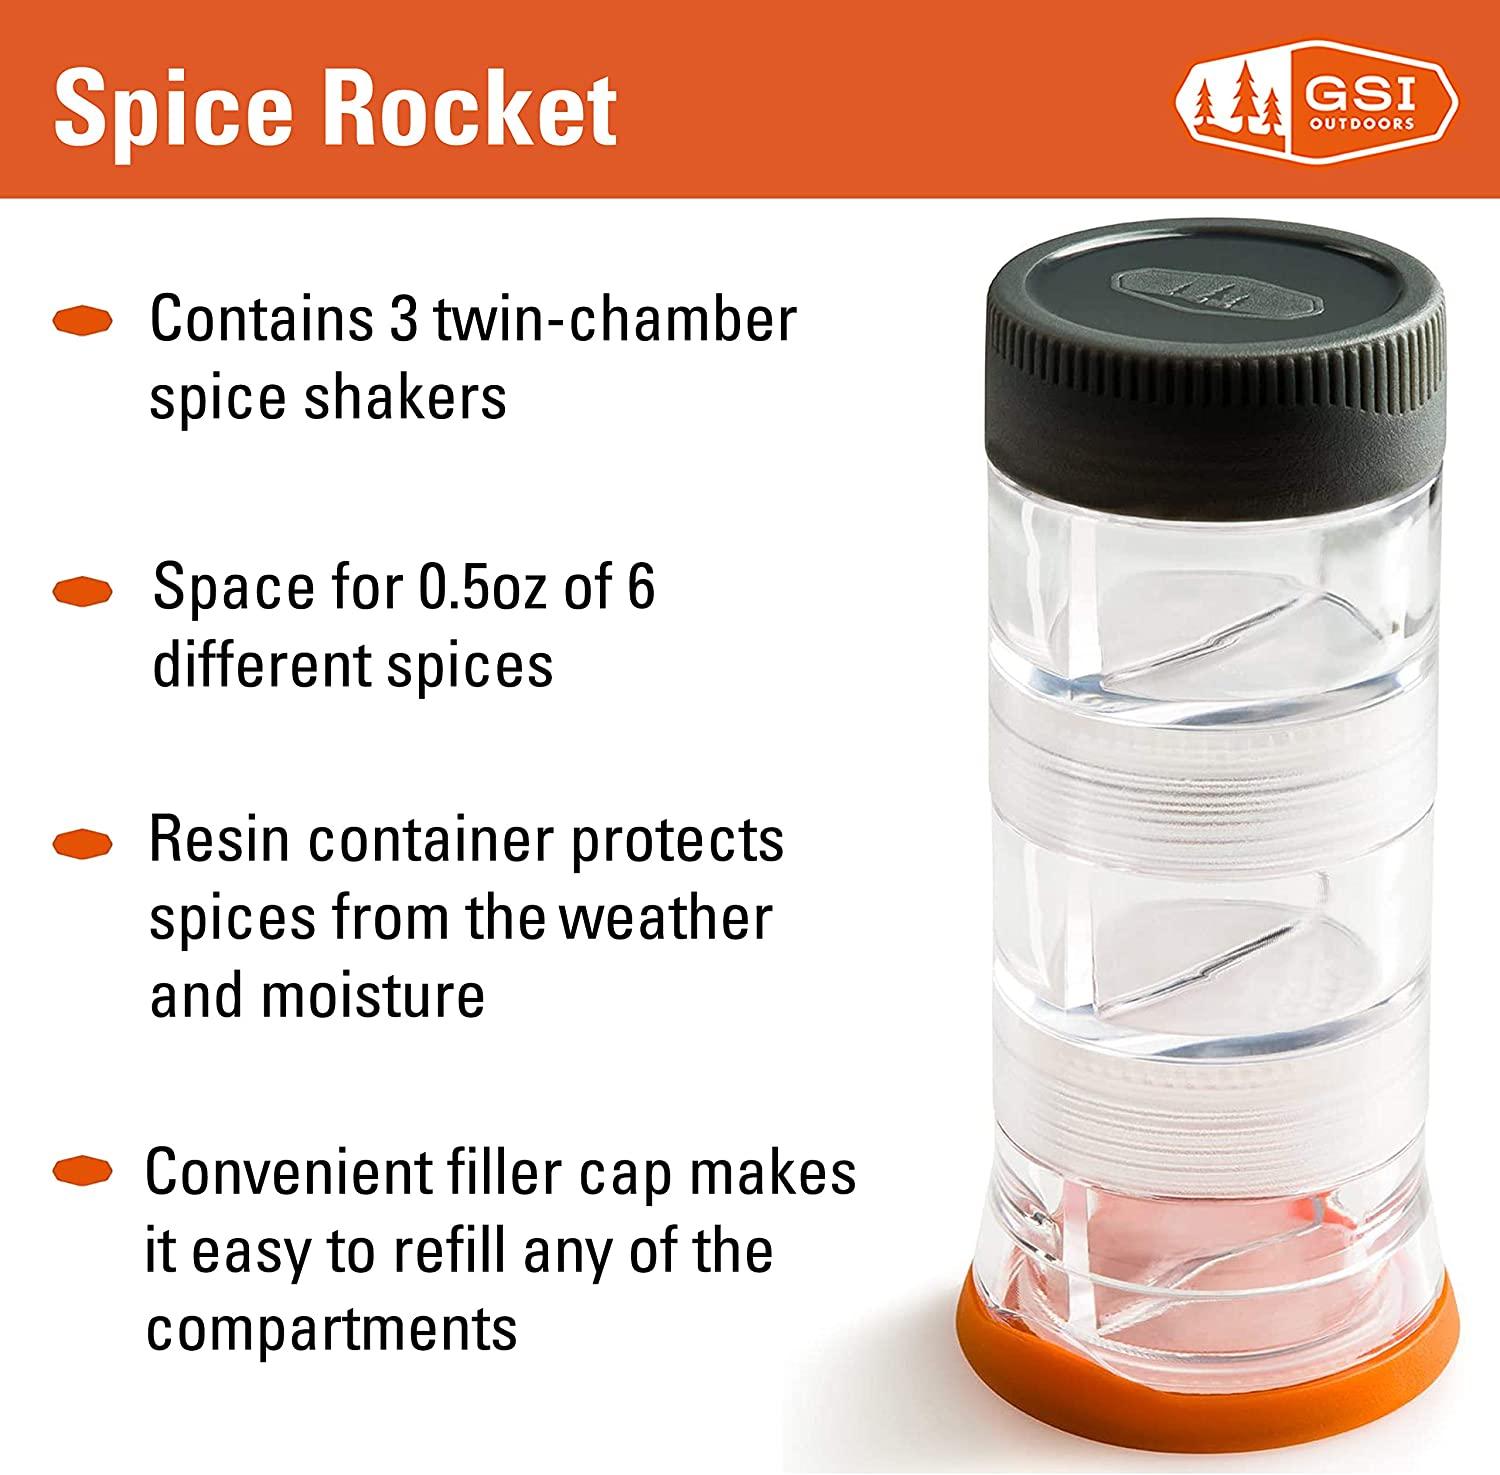 GSI Spice Missile Camping Spice Carrier Review 